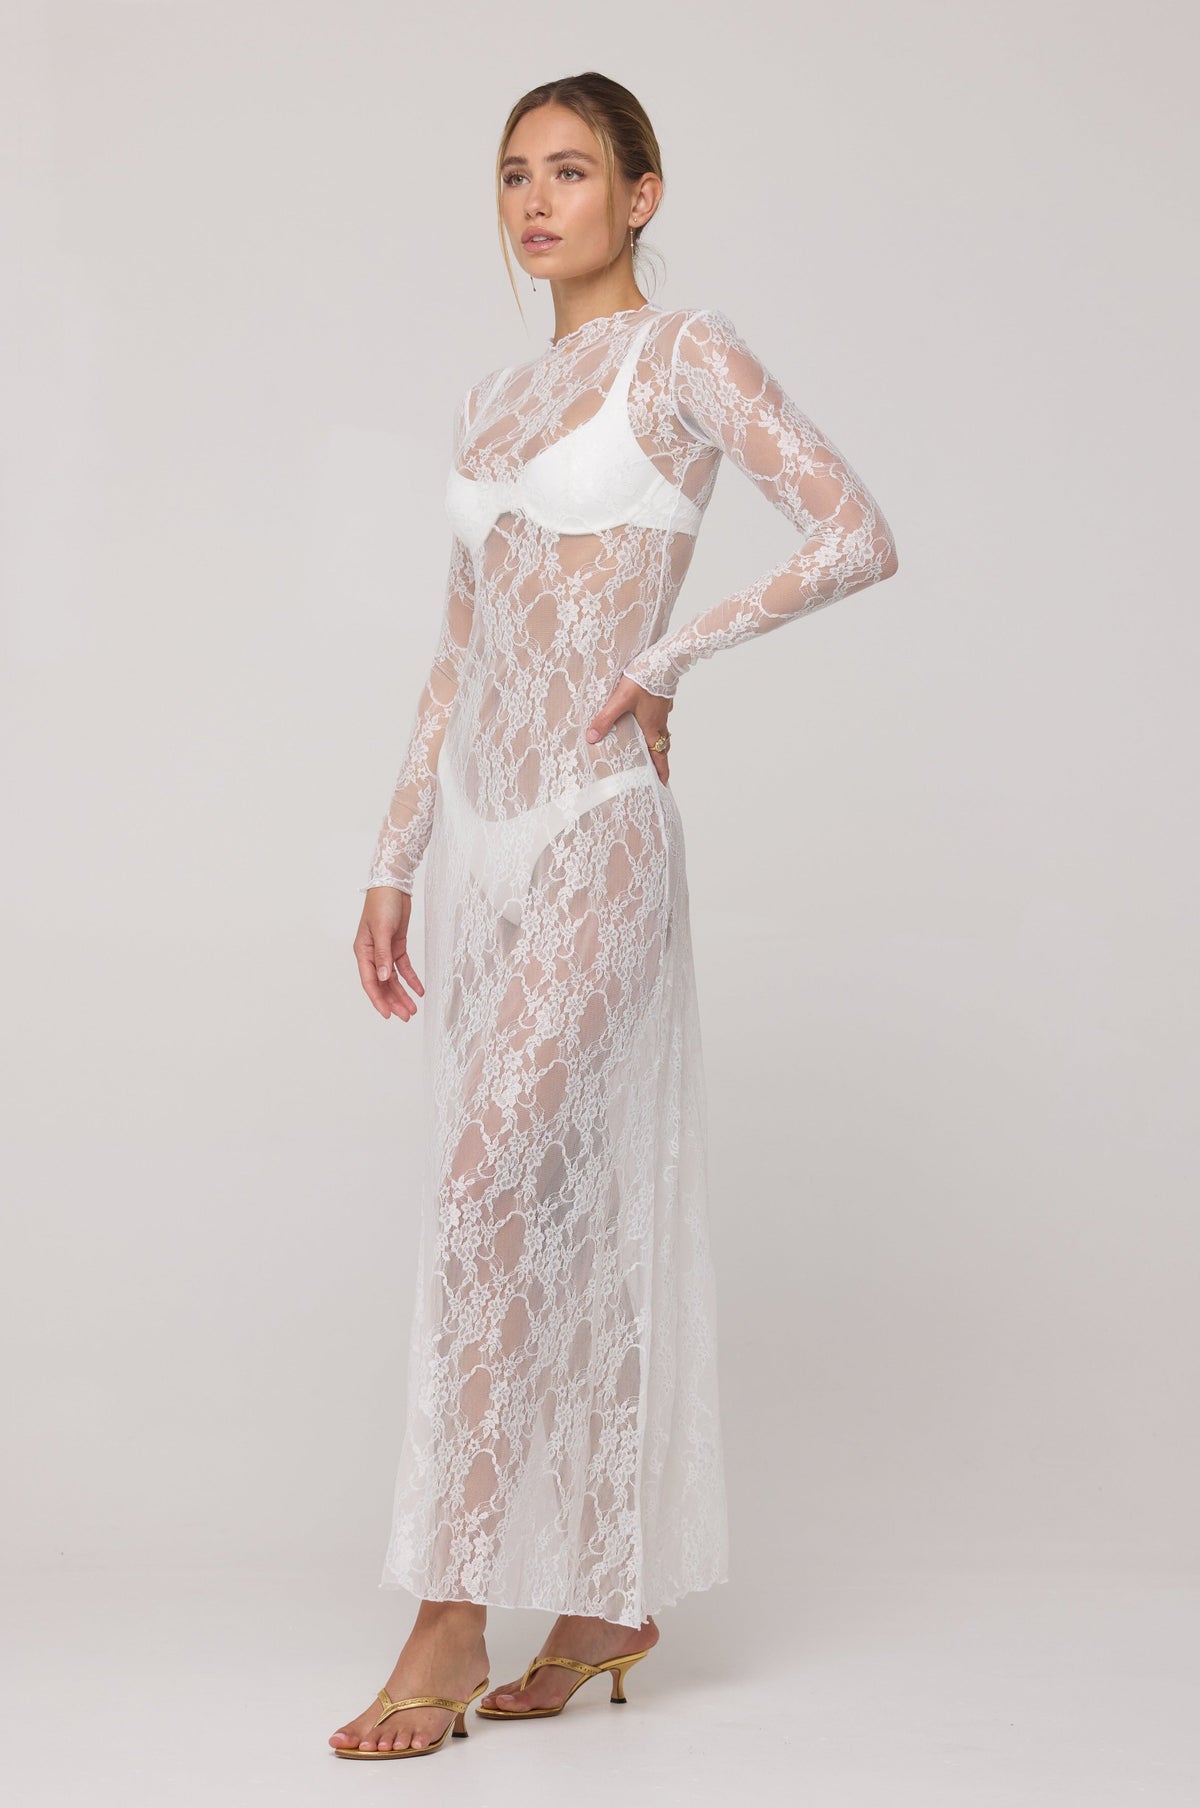 This is an image of Lyon Lace Dress in White Lace - RESA featuring a model wearing the dress